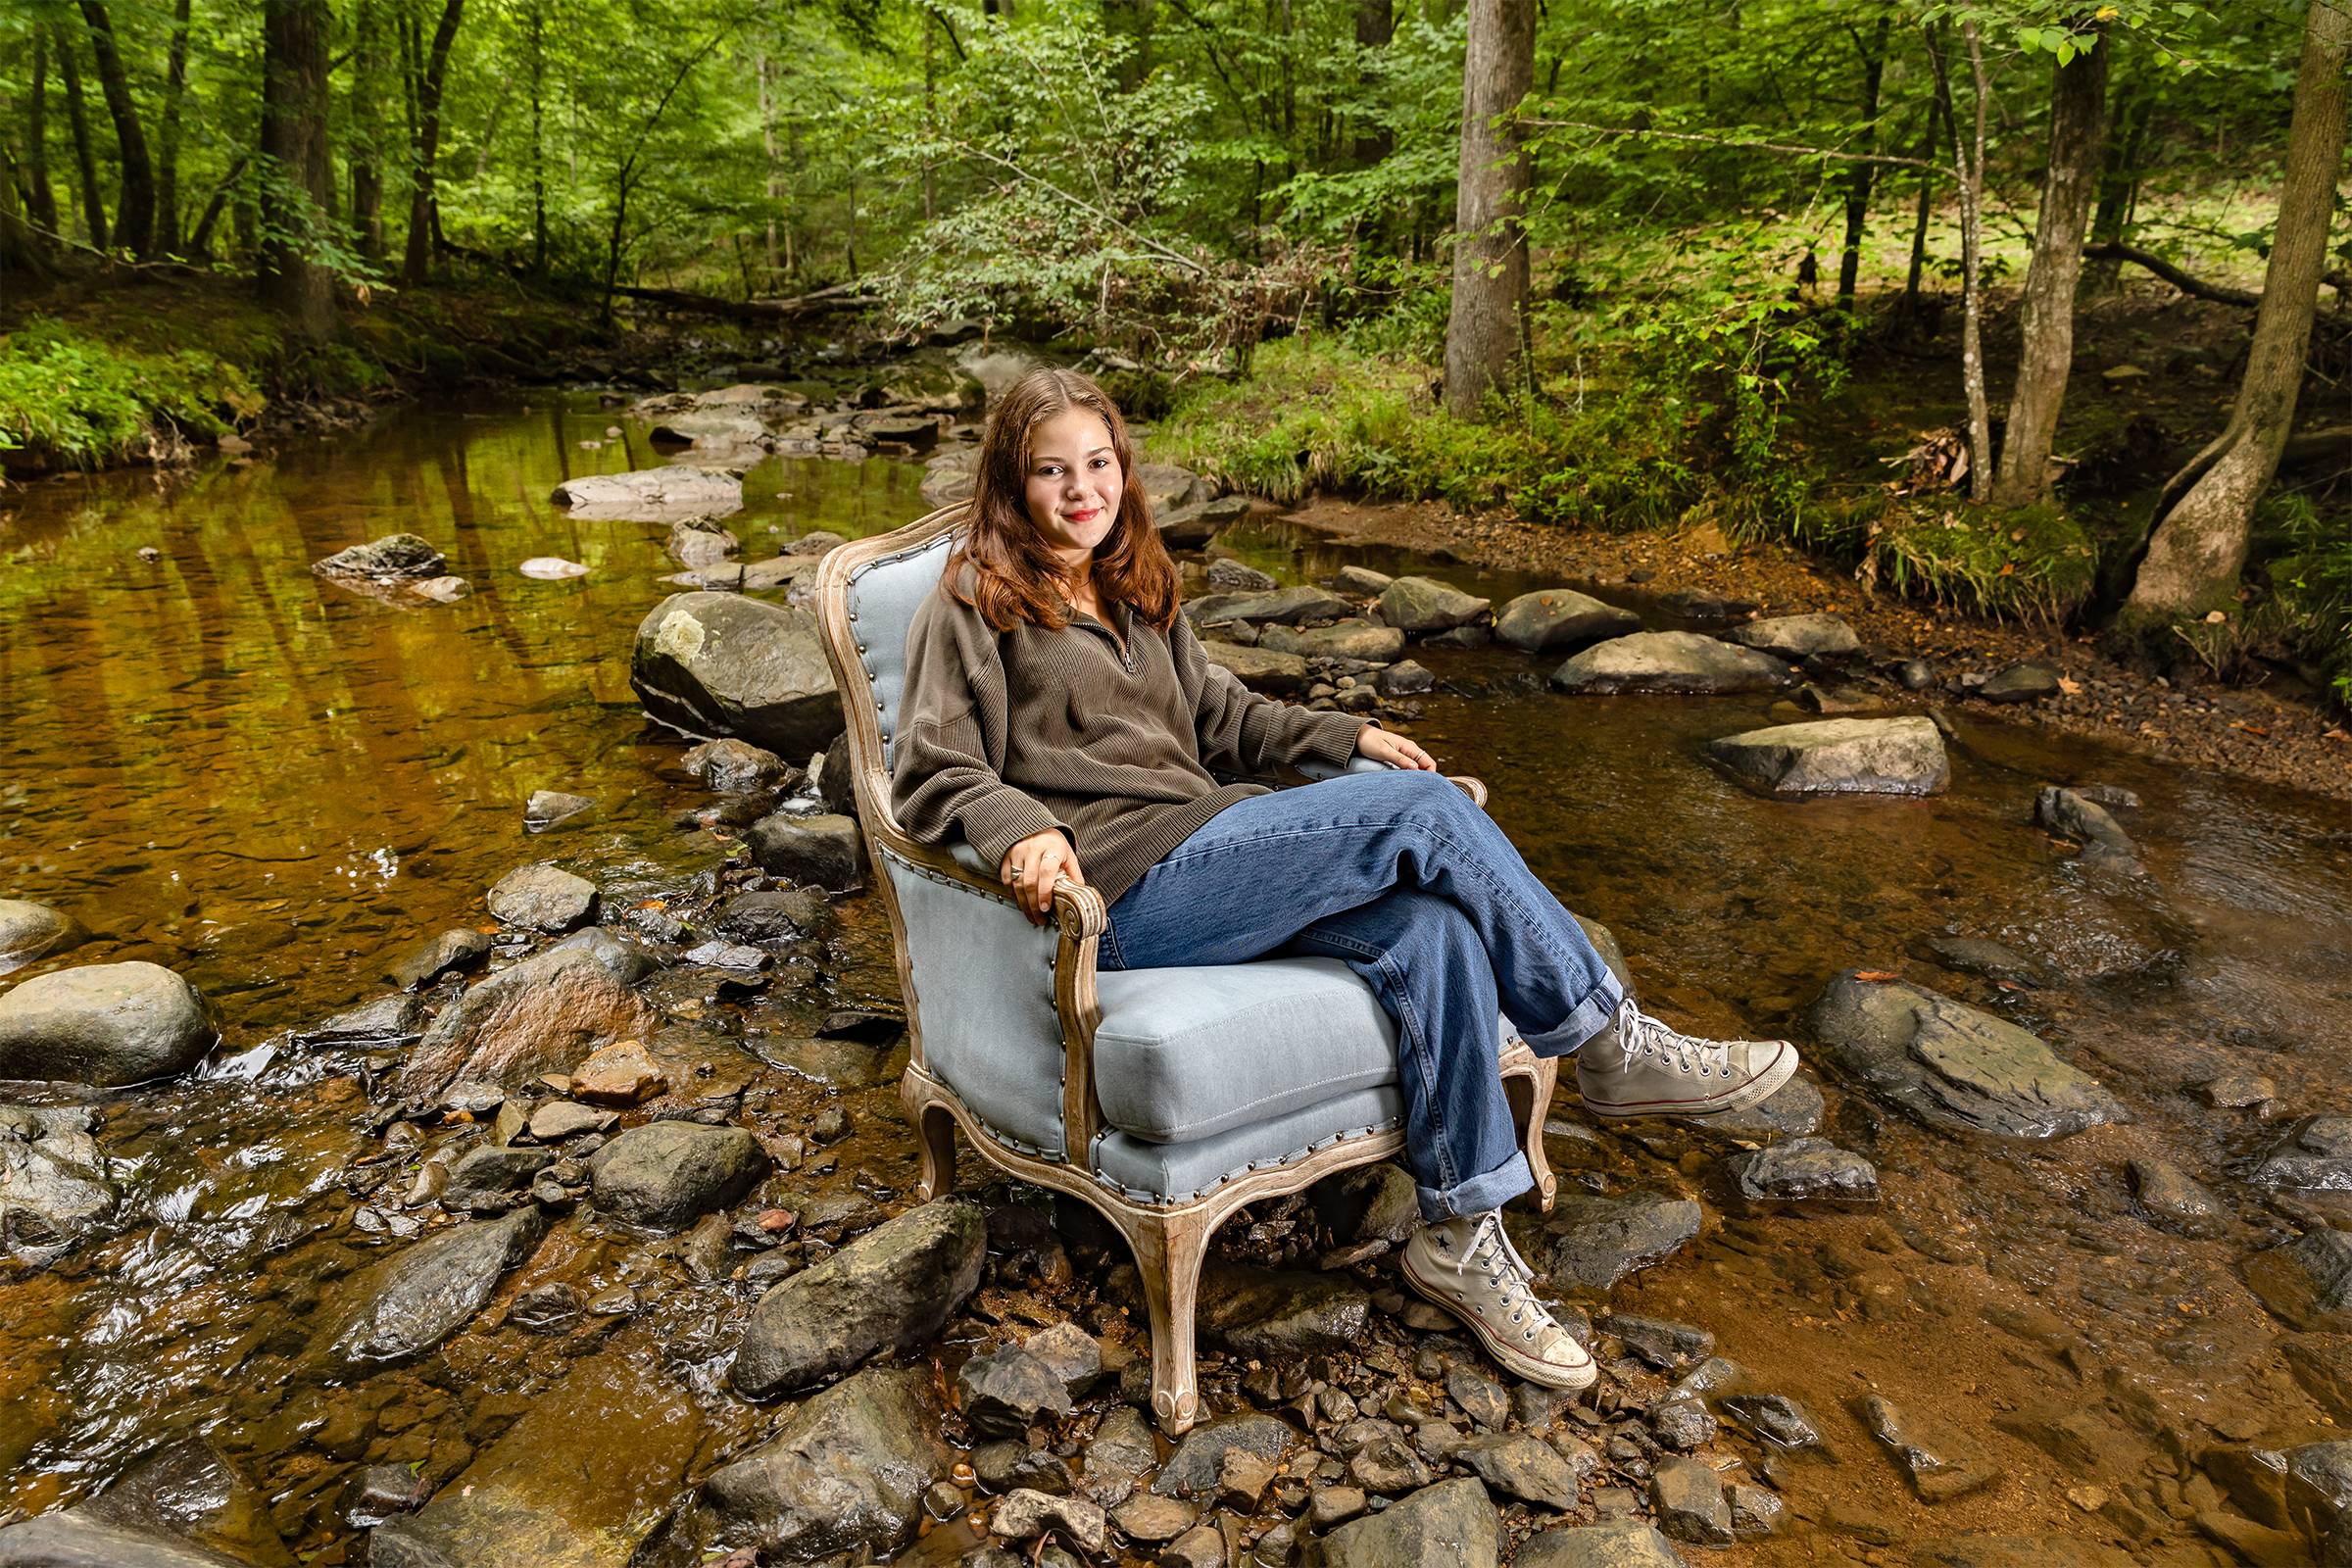 A woman named Sophie Wiss sitting in a blue chair and posing for a portrait in a creek.